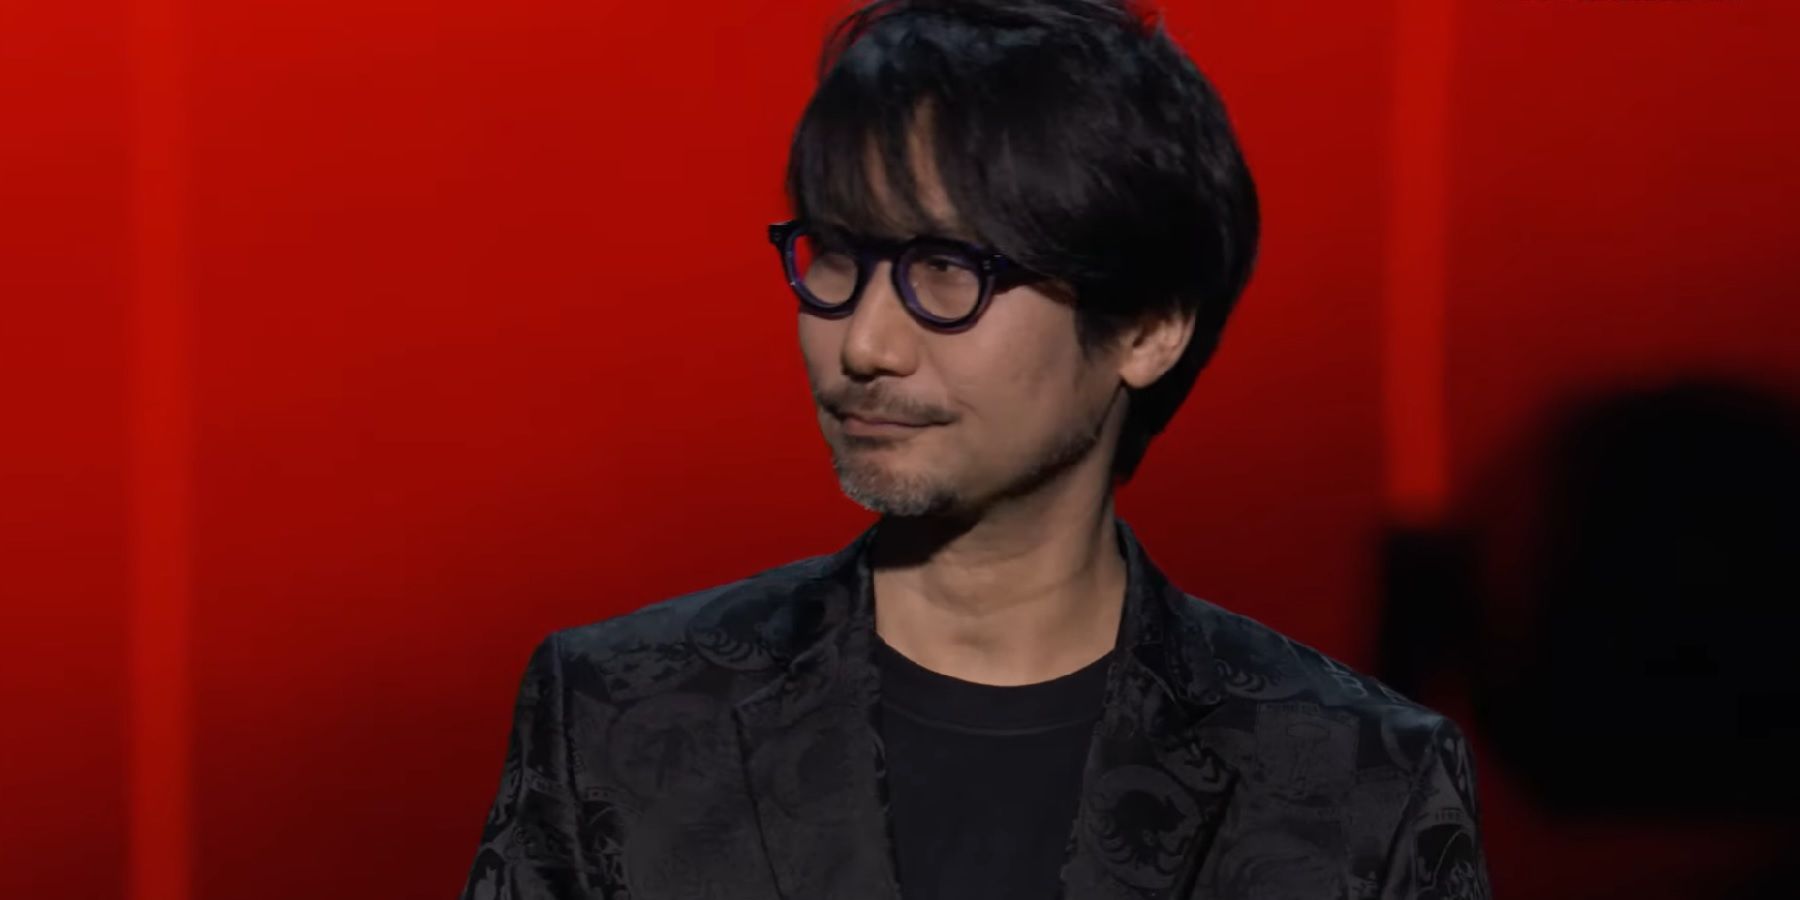 Interest in Hideo Kojima Games Spikes Dramatically After
Death Stranding 2 Reveal